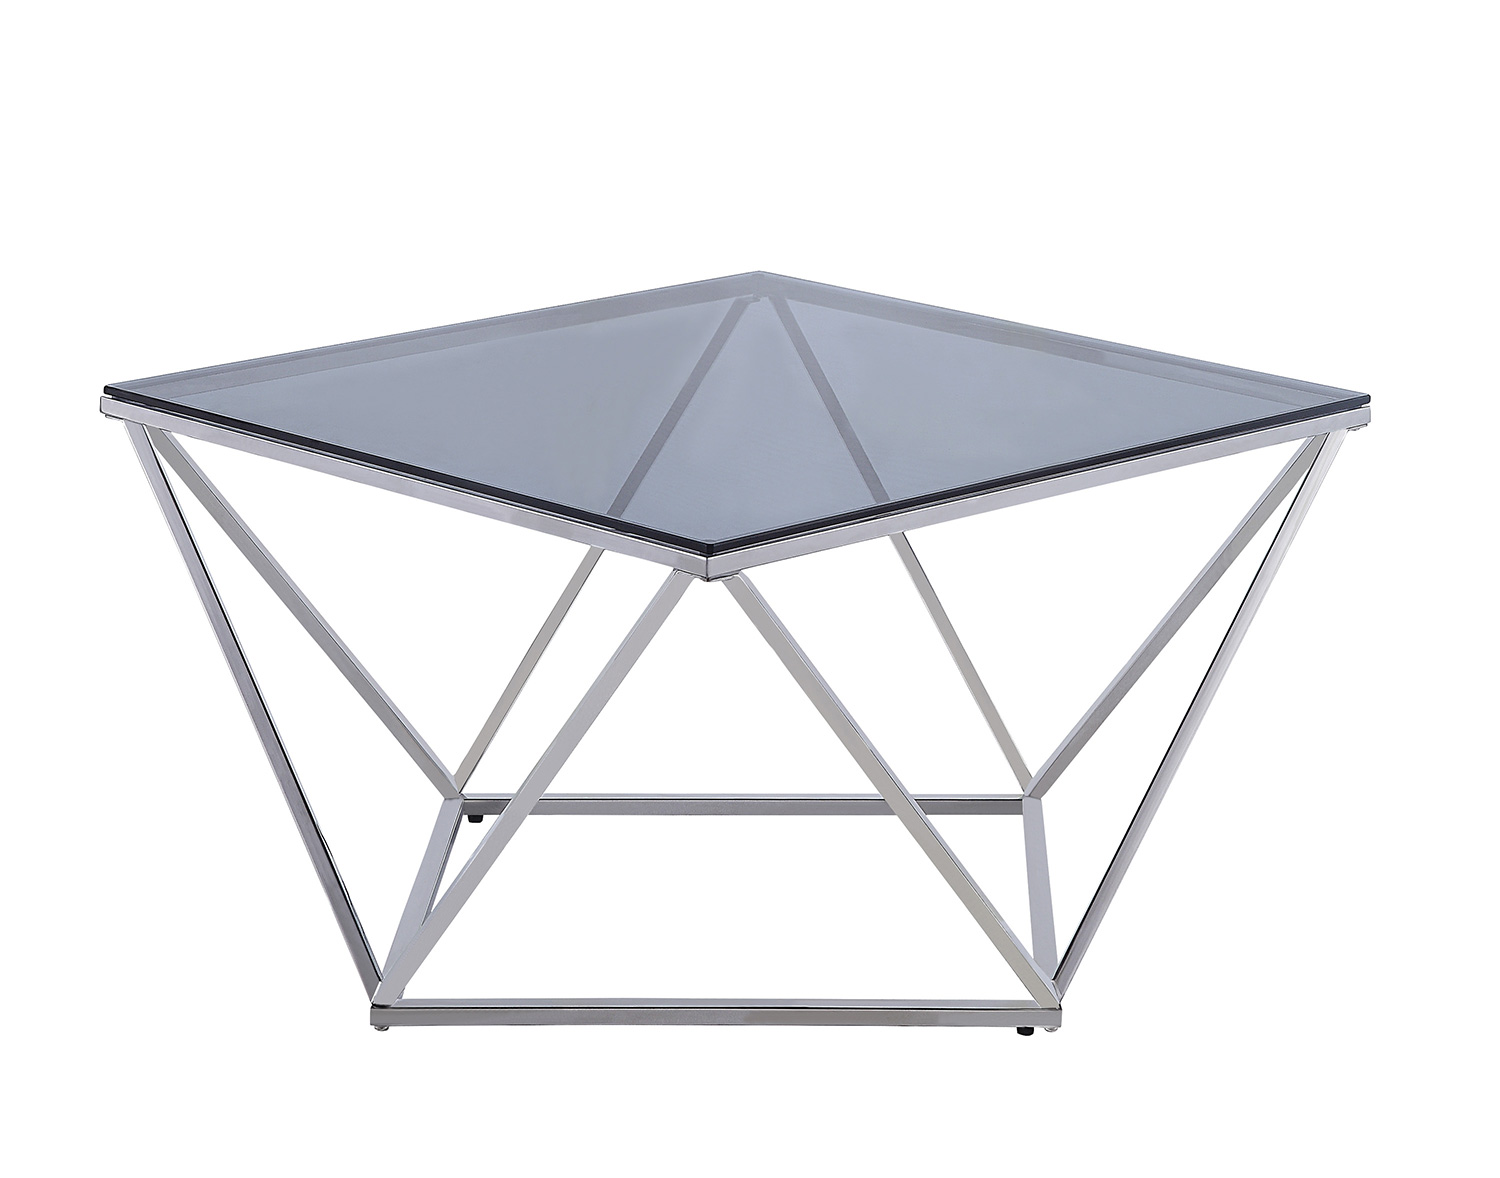 Homelegance Rex Cocktail Table with Gray Glass Insert - Silver